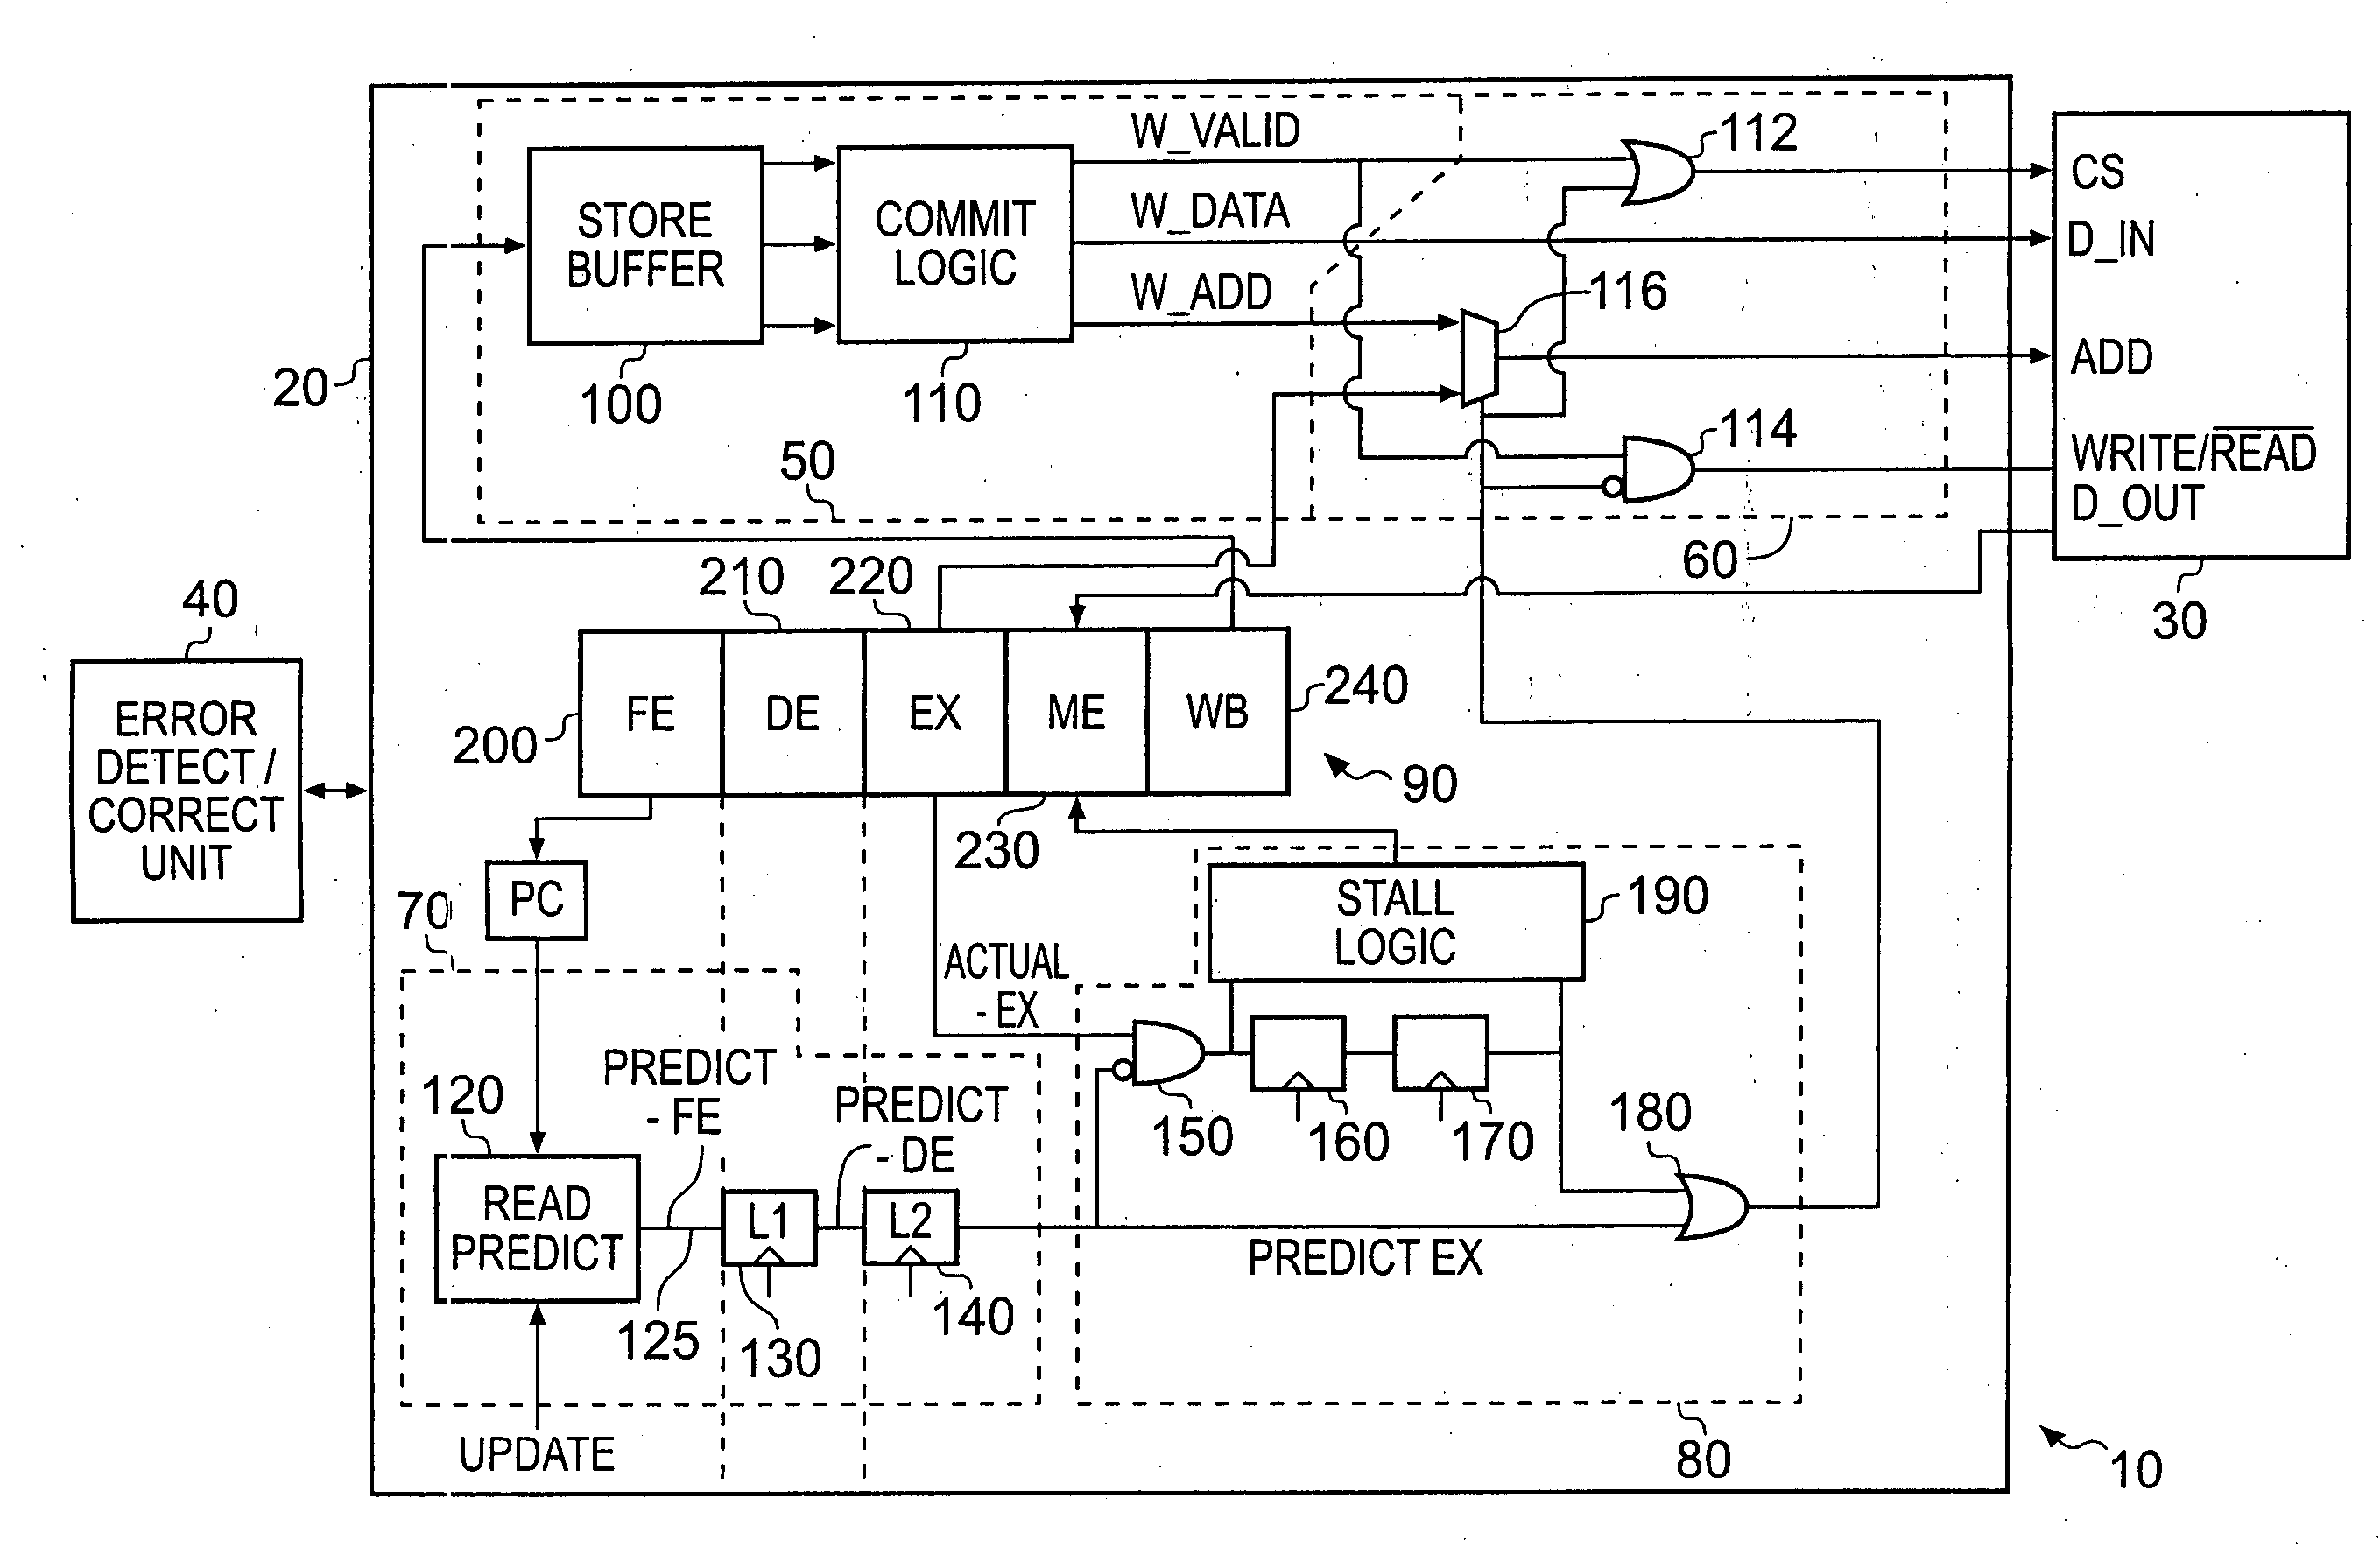 Control of metastability in the pipelined data processing apparatus